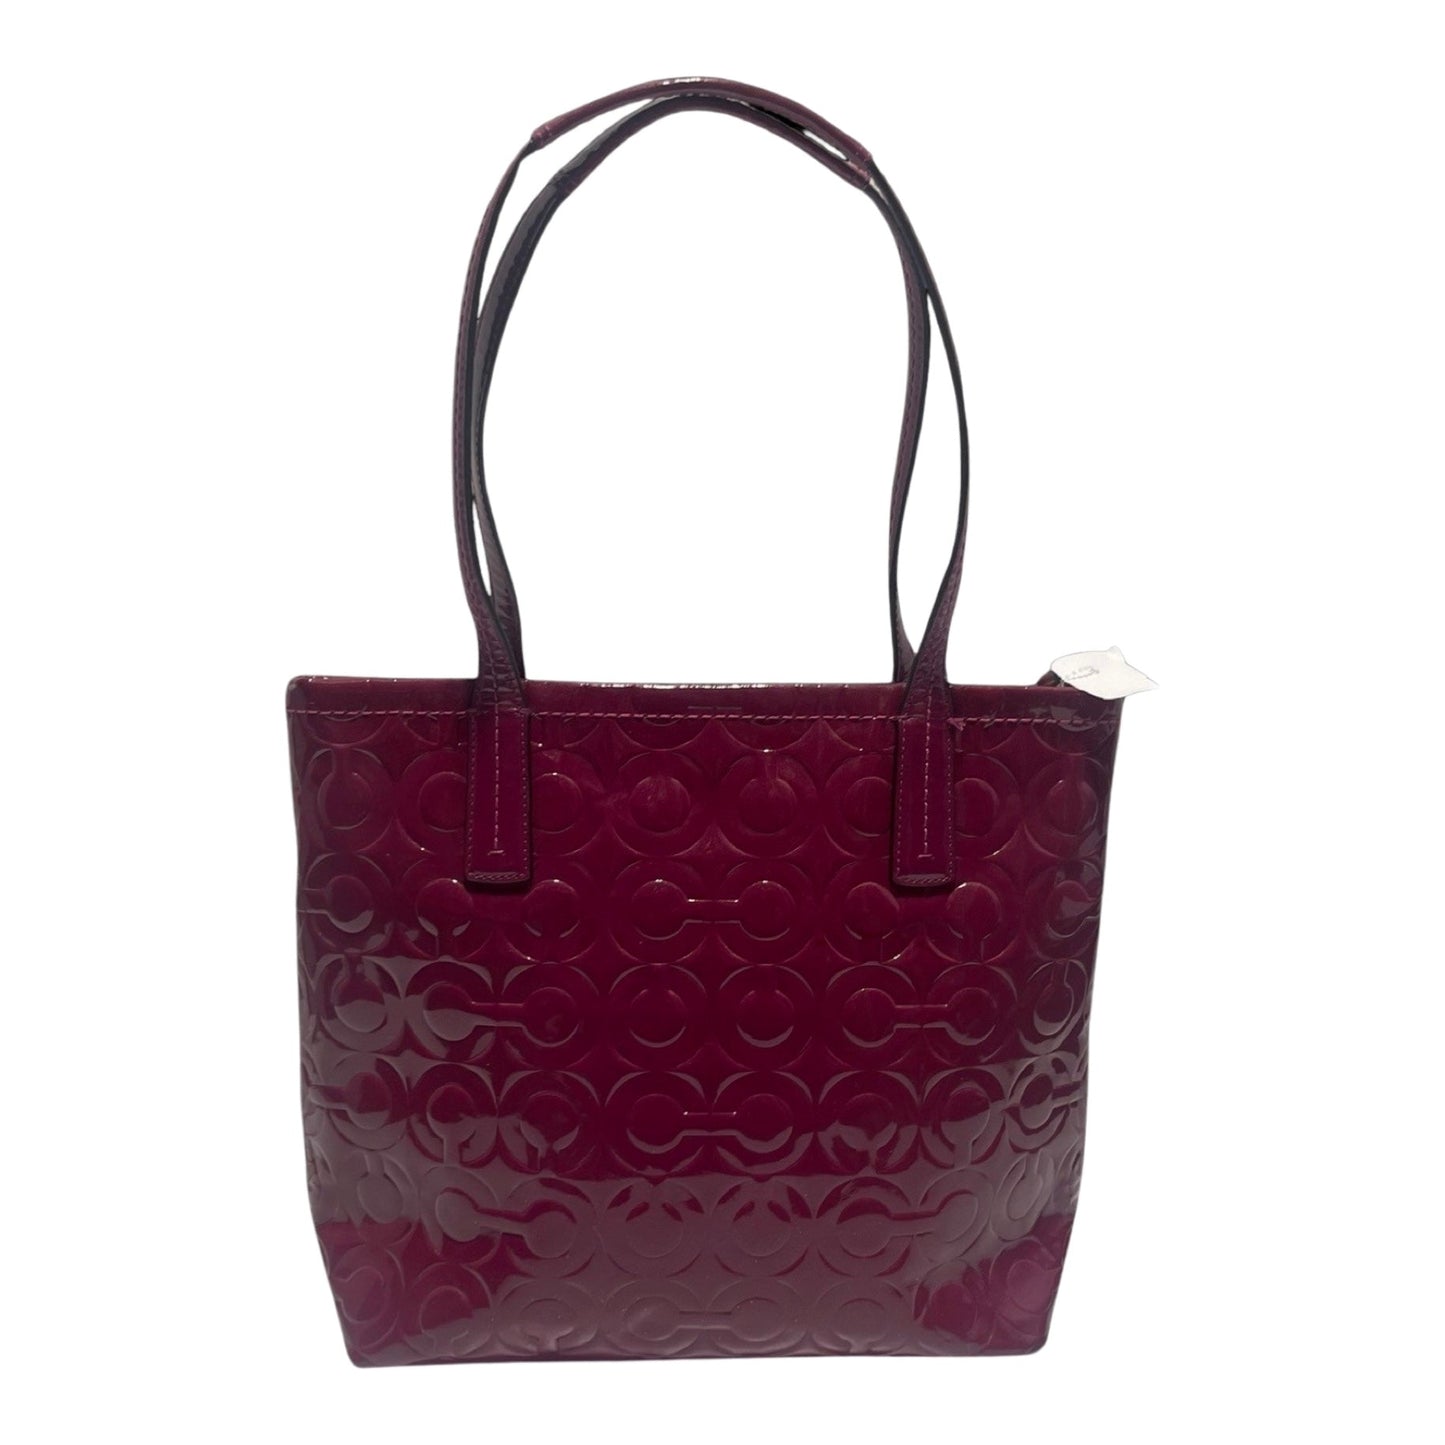 Peyton Embossed Patent Leather Passion Berry Tote Handbag Designer By Coach  Size: Medium